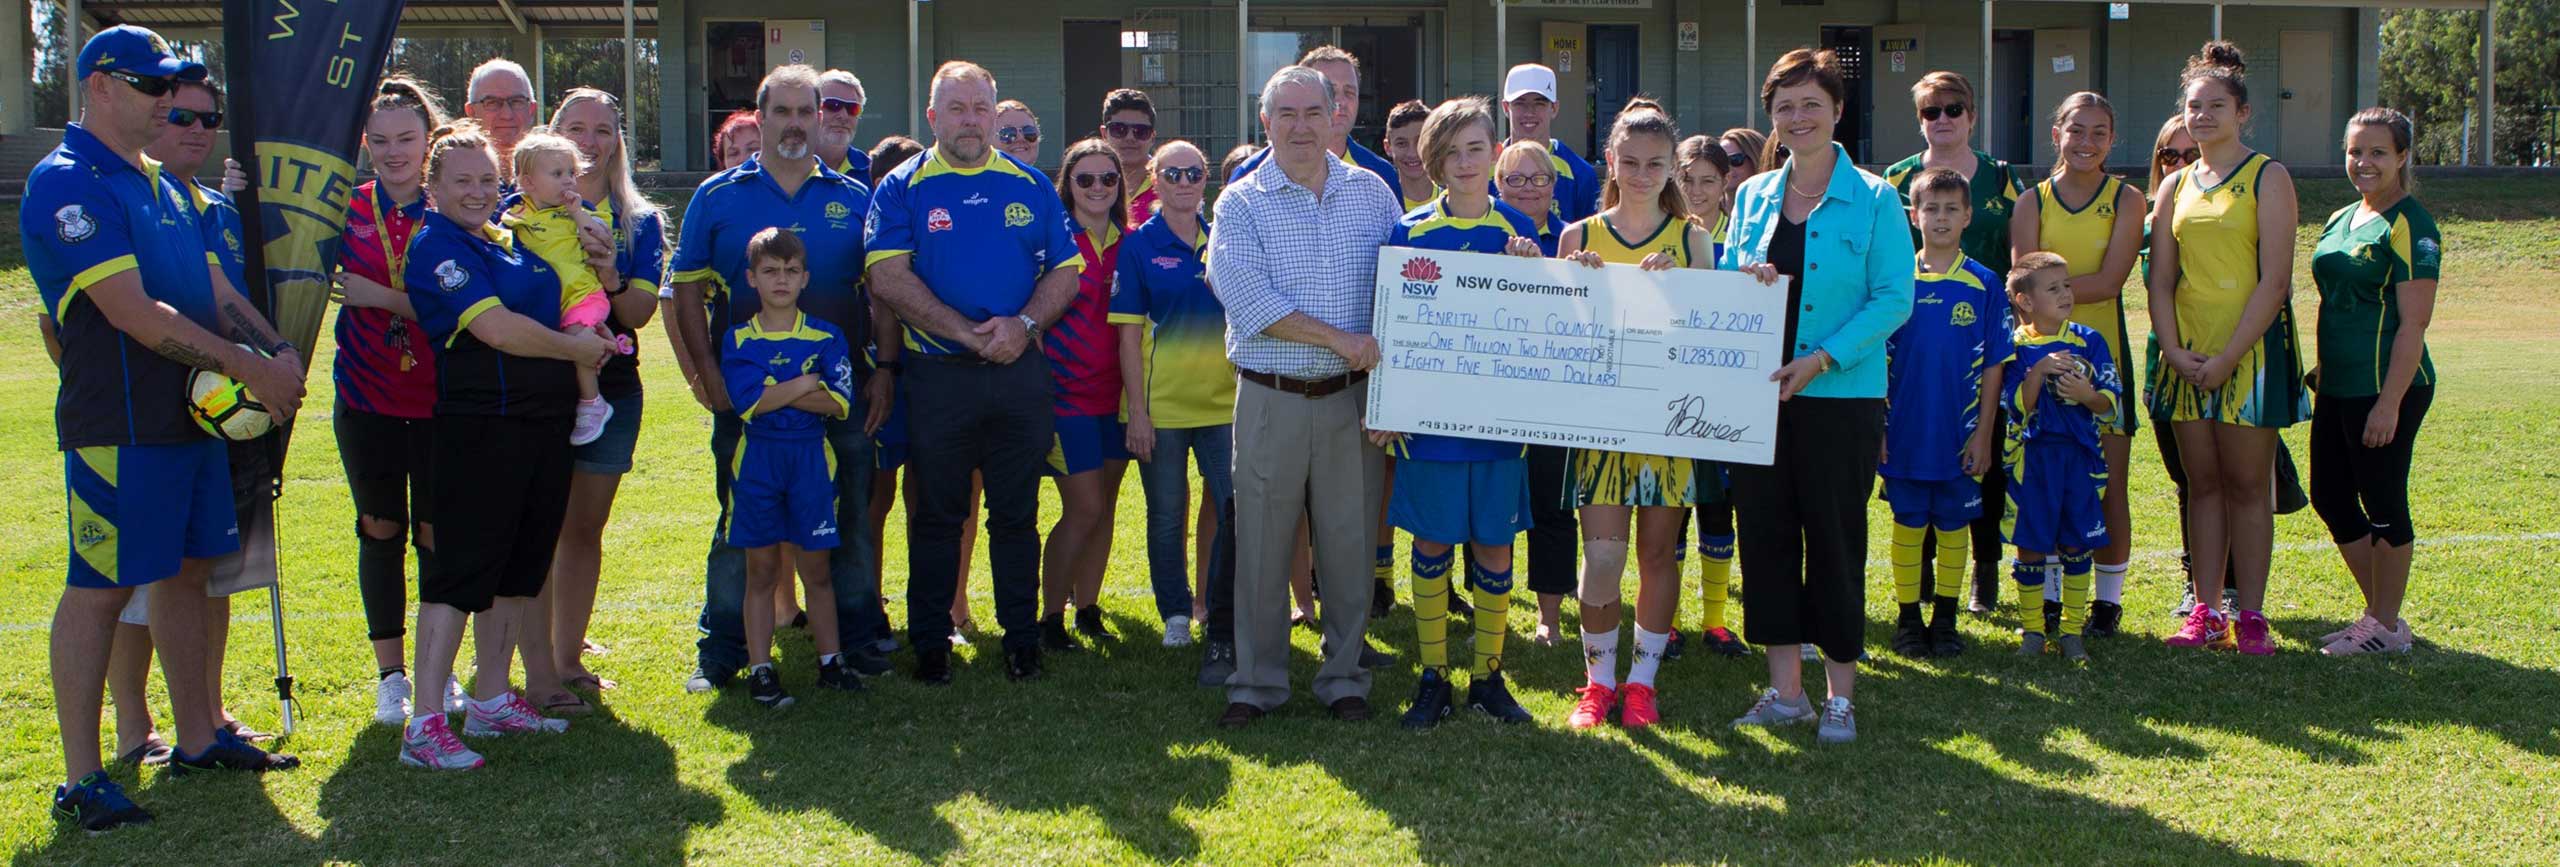 Penrith Mayor Ross Fowler OAM and Member for Mulgoa Tanya Davies with St Clair Soccer and St Clair Netball club committee members and volunteers.